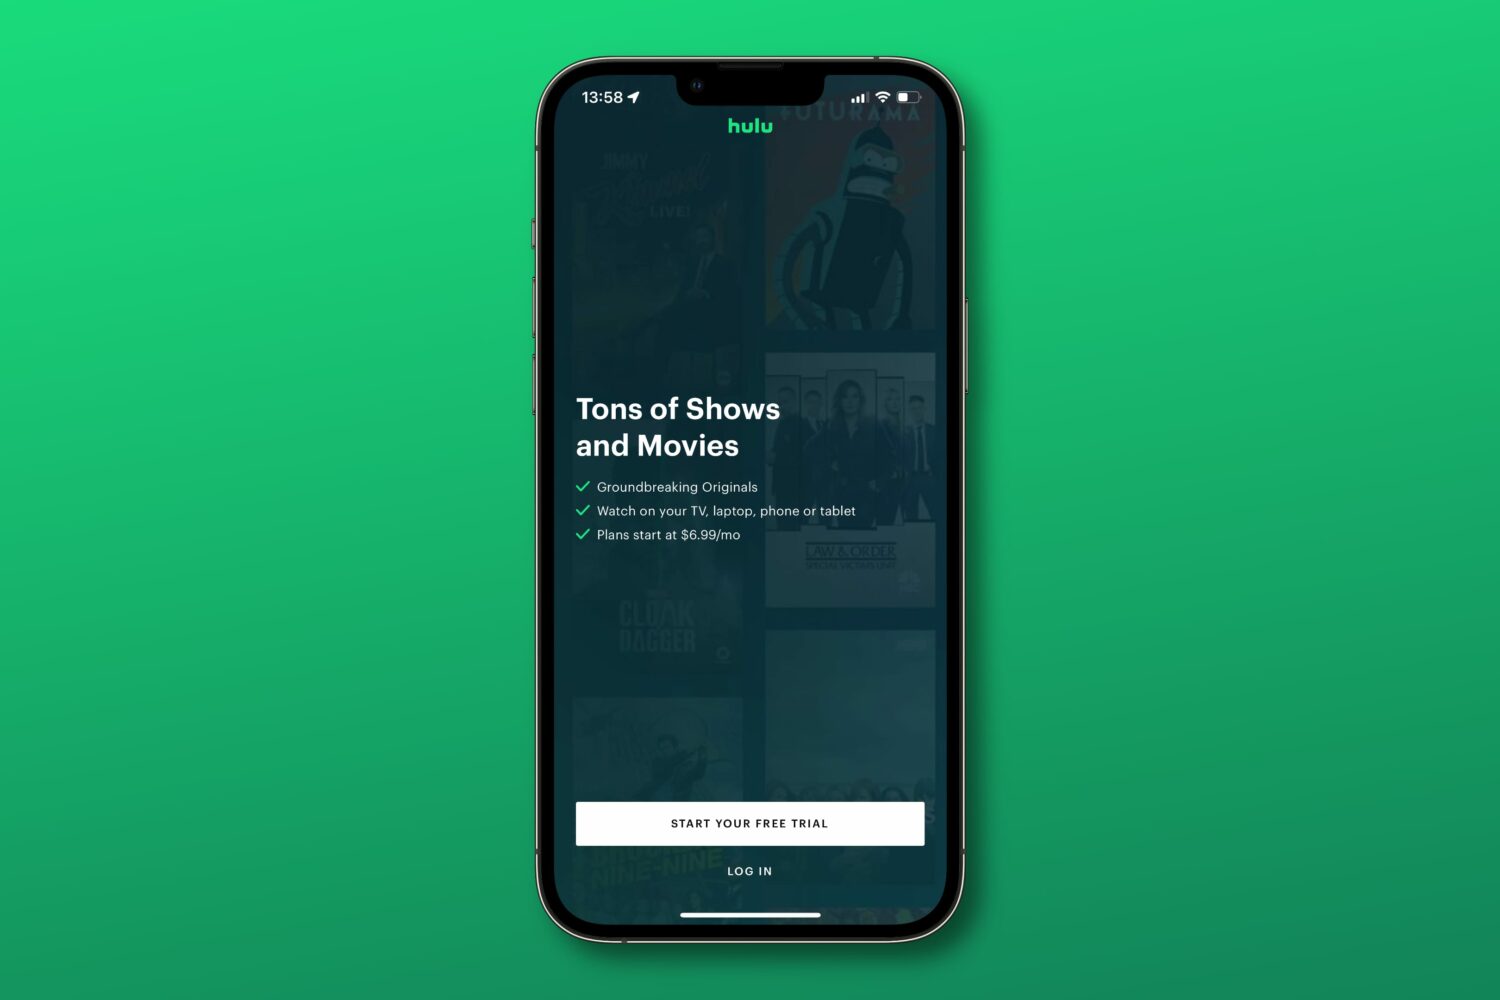 Featured image showing the splash screen in the Hulu app on iPhone, set against a green gradient background